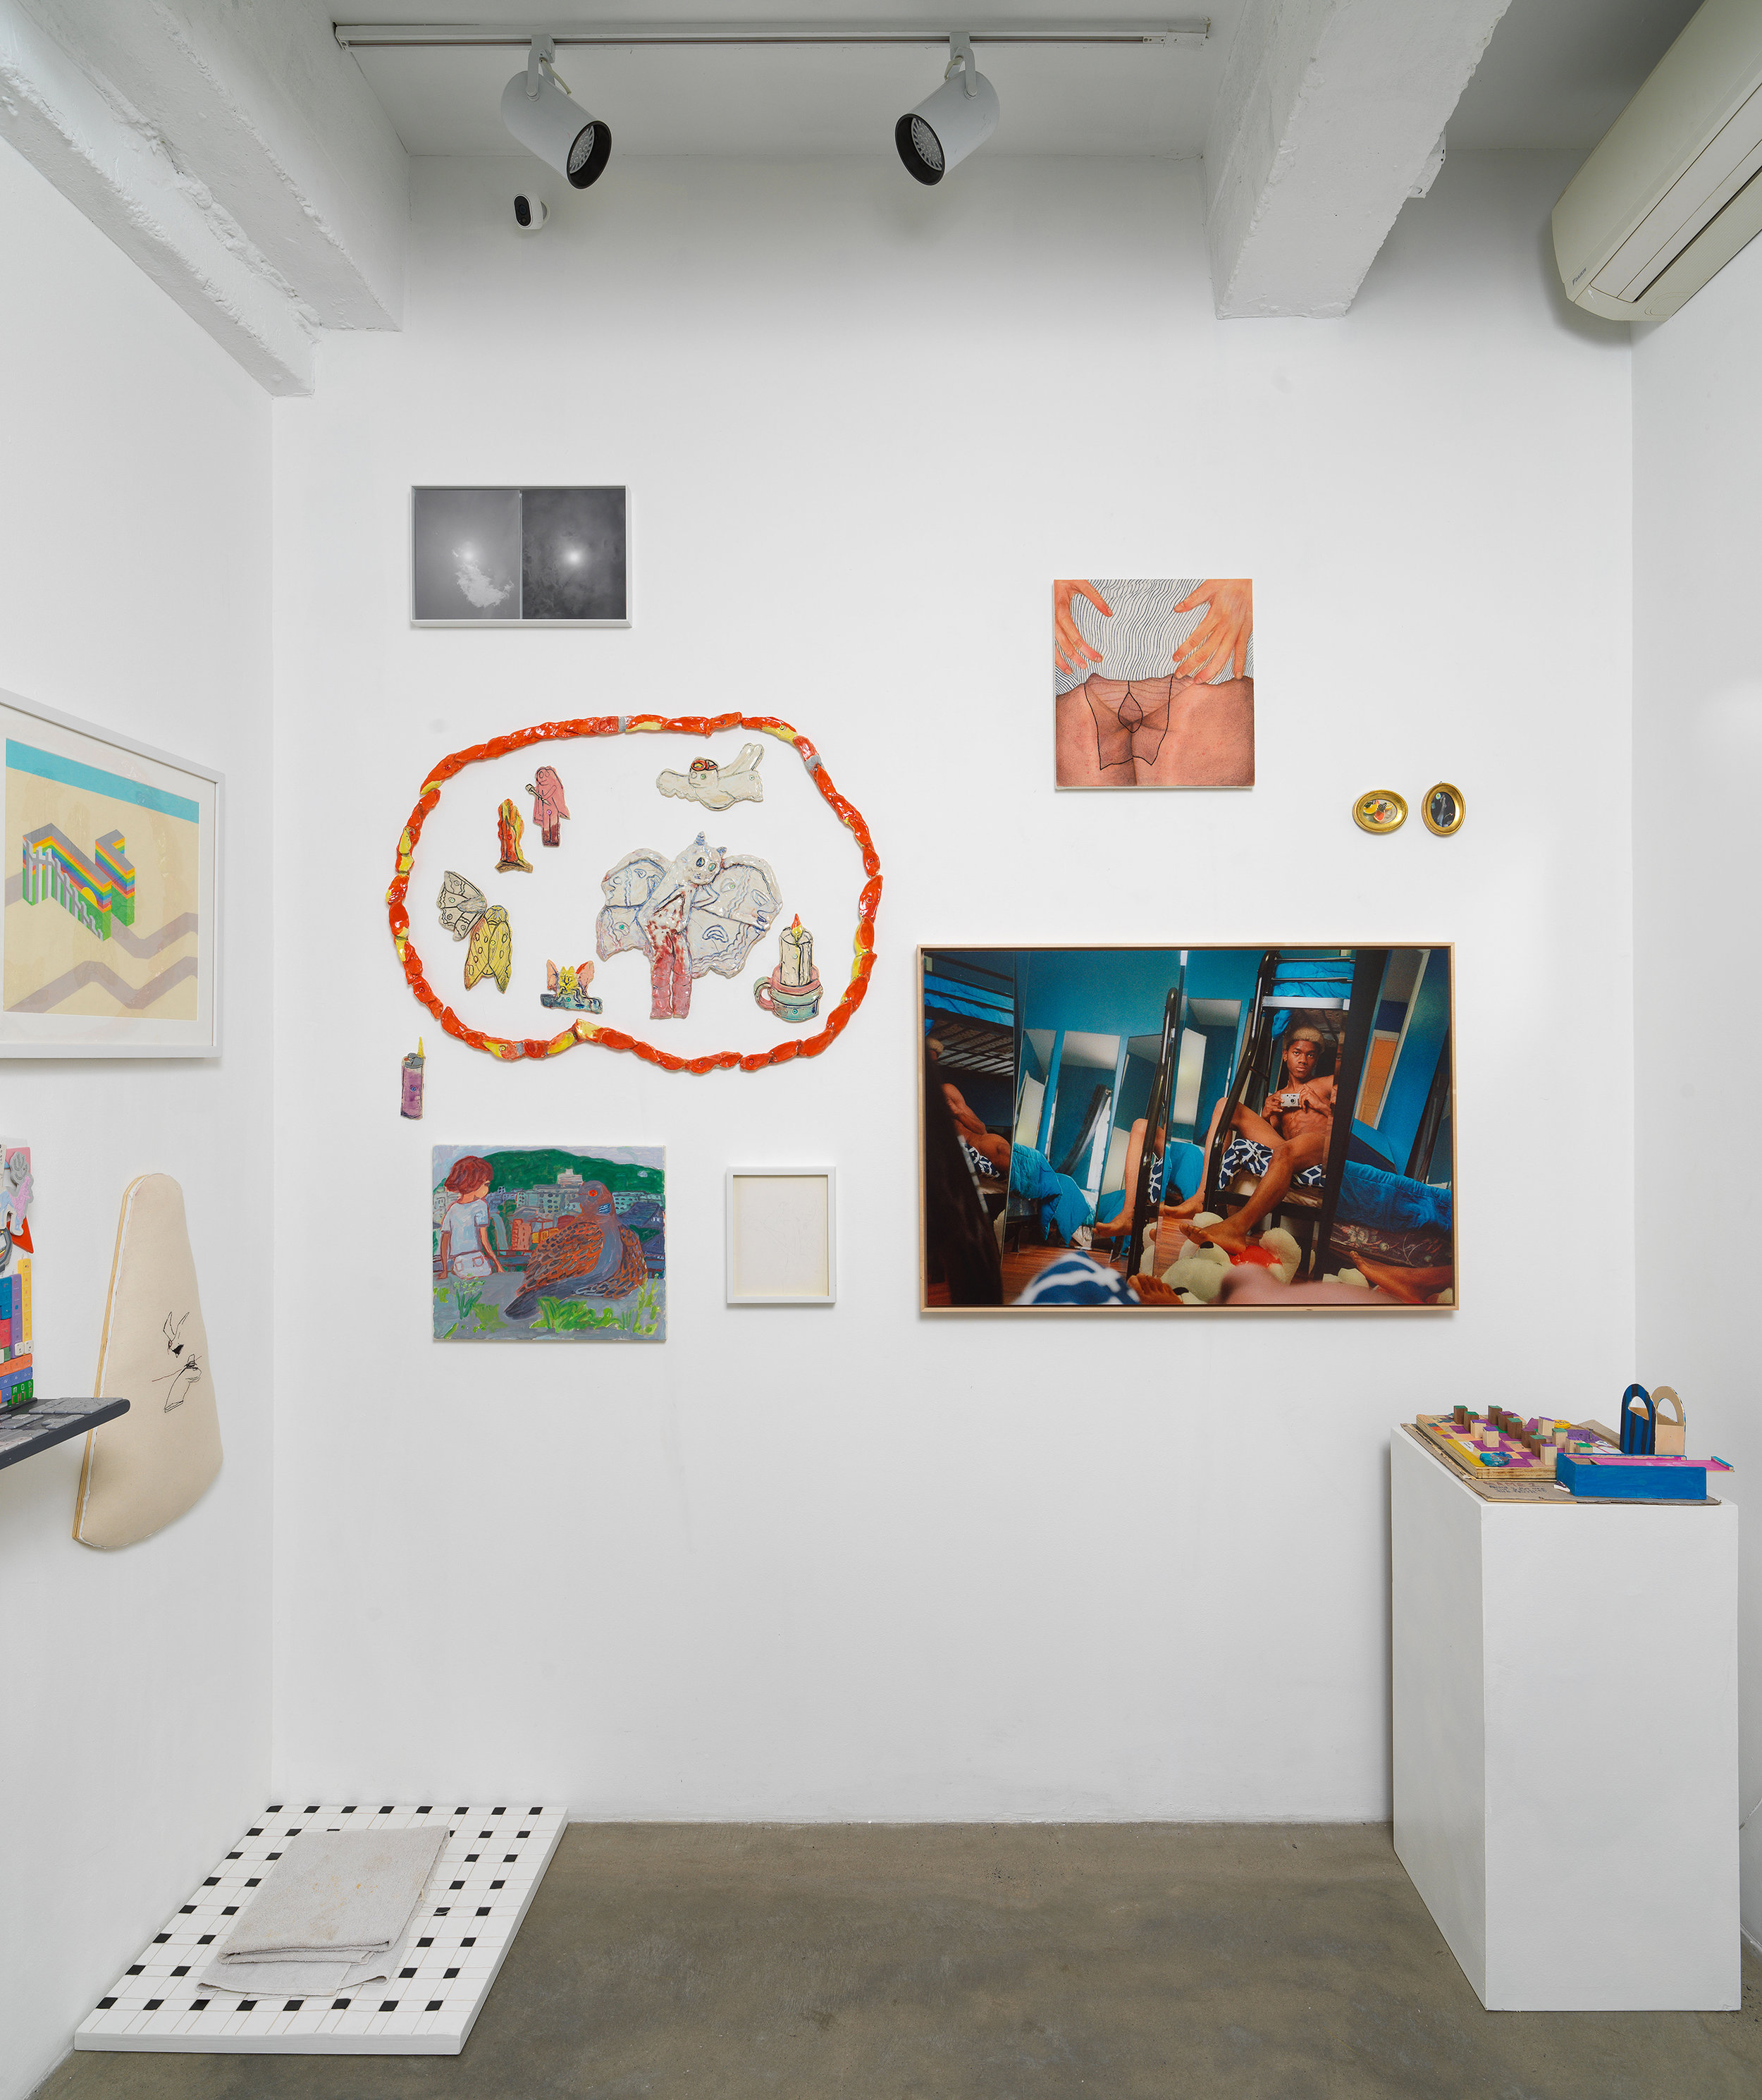 Installation view of 'Can You Dream It' featuring salon-style hanging of multimedia works by various artists, floor and pedesal-based sculpture